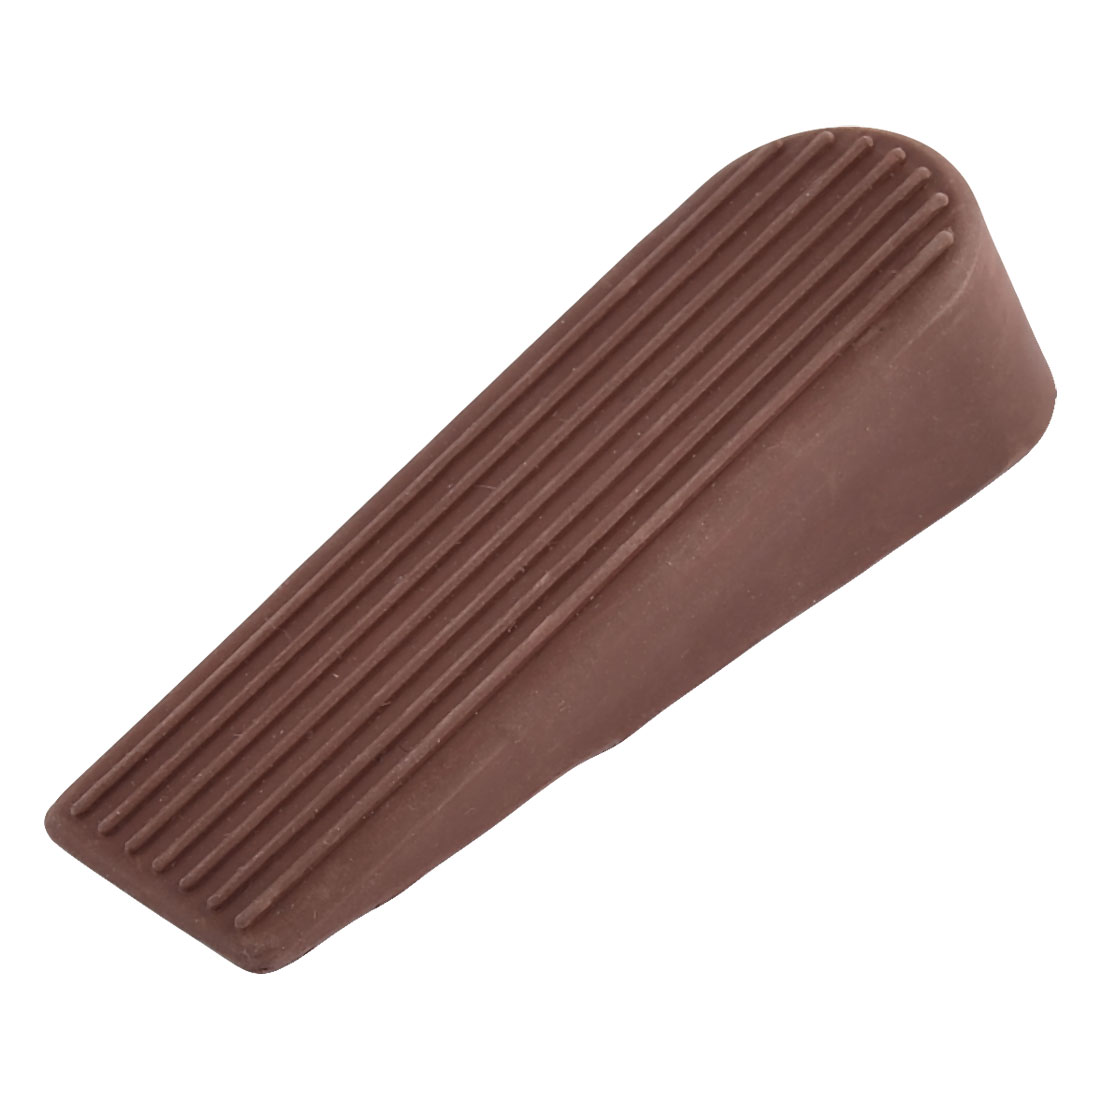 Unique Bargains Household Office Soft Plastic Anti Slip Door Wedge Stopper Protector Brown